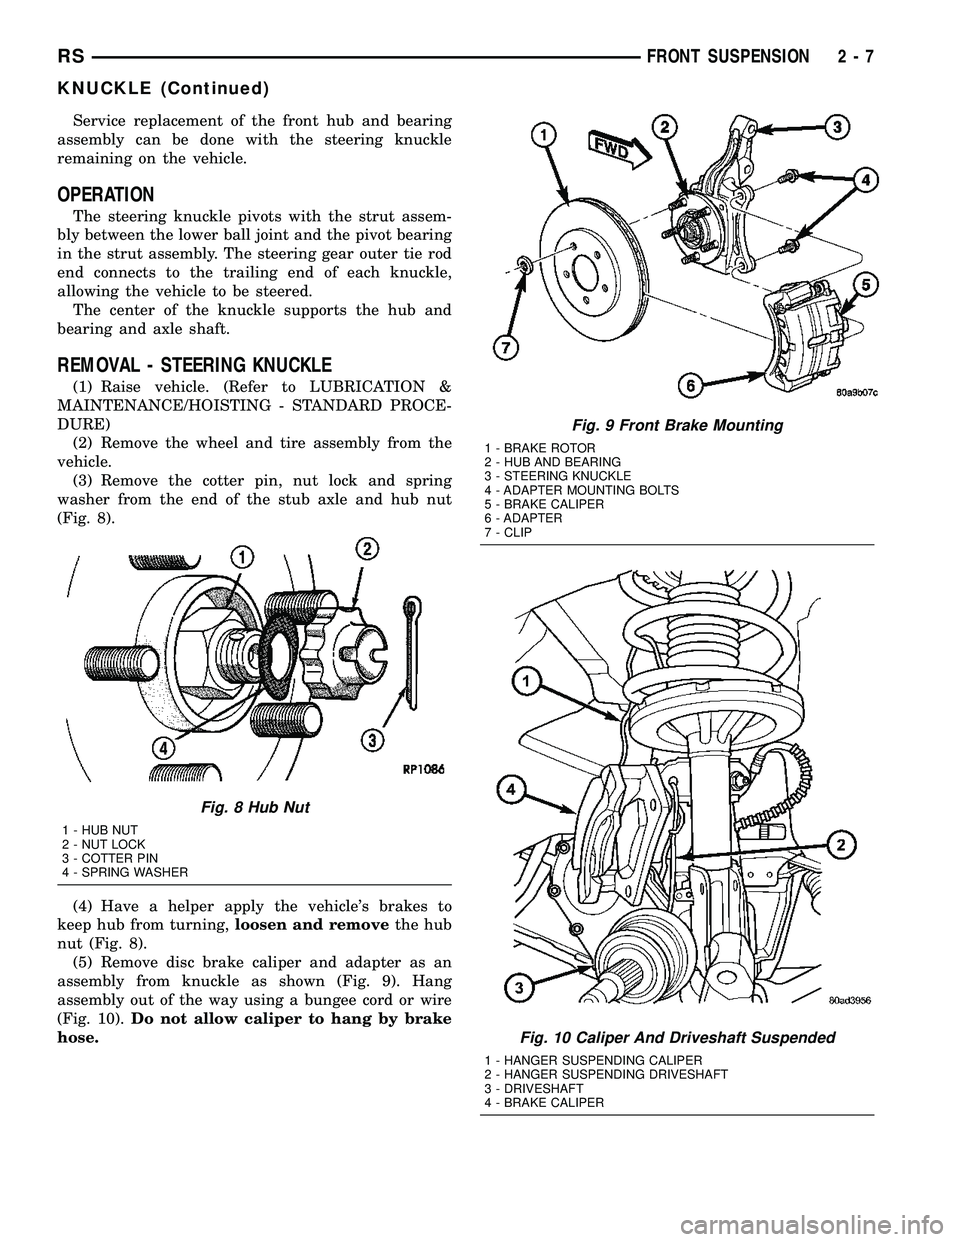 DODGE TOWN AND COUNTRY 2004 Workshop Manual Service replacement of the front hub and bearing
assembly can be done with the steering knuckle
remaining on the vehicle.
OPERATION
The steering knuckle pivots with the strut assem-
bly between the lo